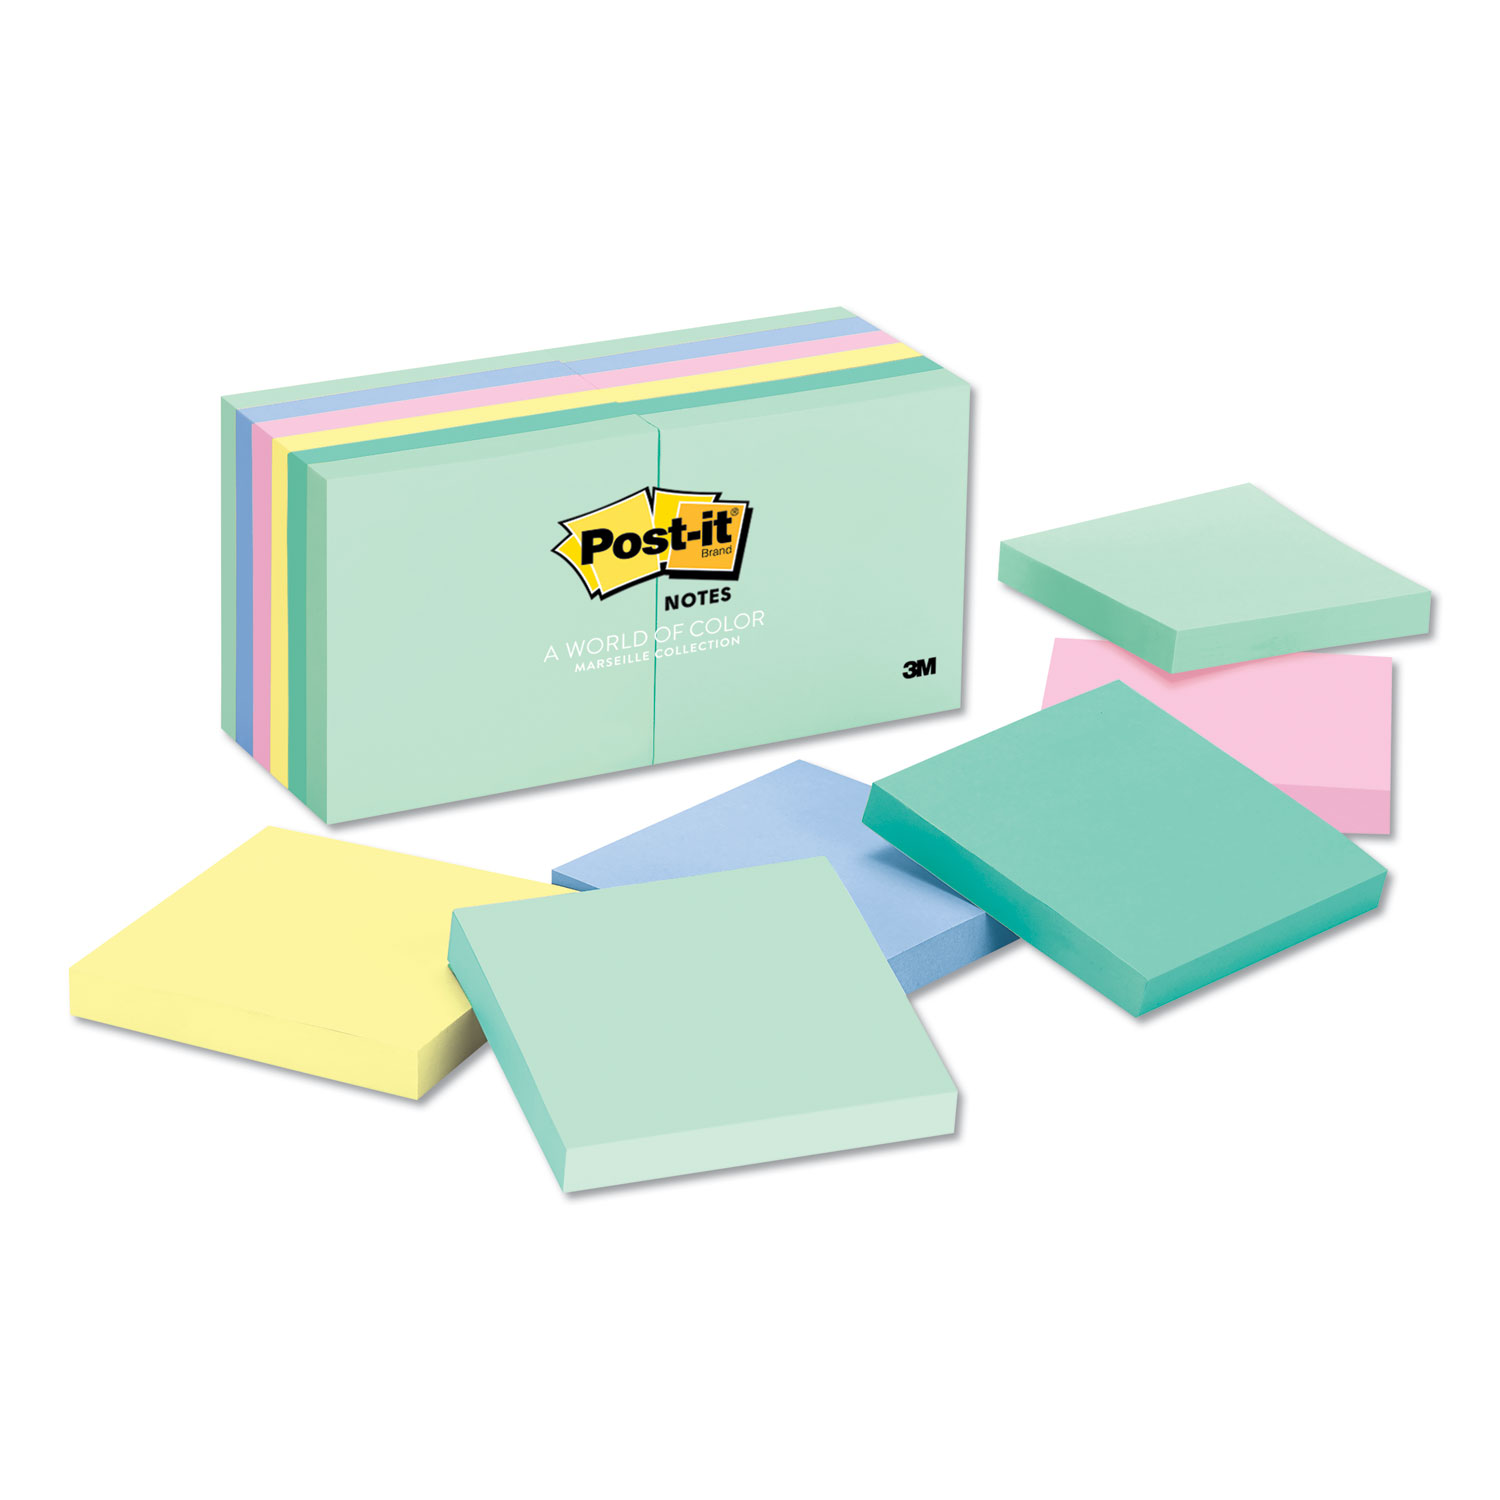  Post-it Notes 654-AST Original Pads in Marseille Colors, 3 x 3, 100-Sheet, 12/Pack (MMM654AST) 